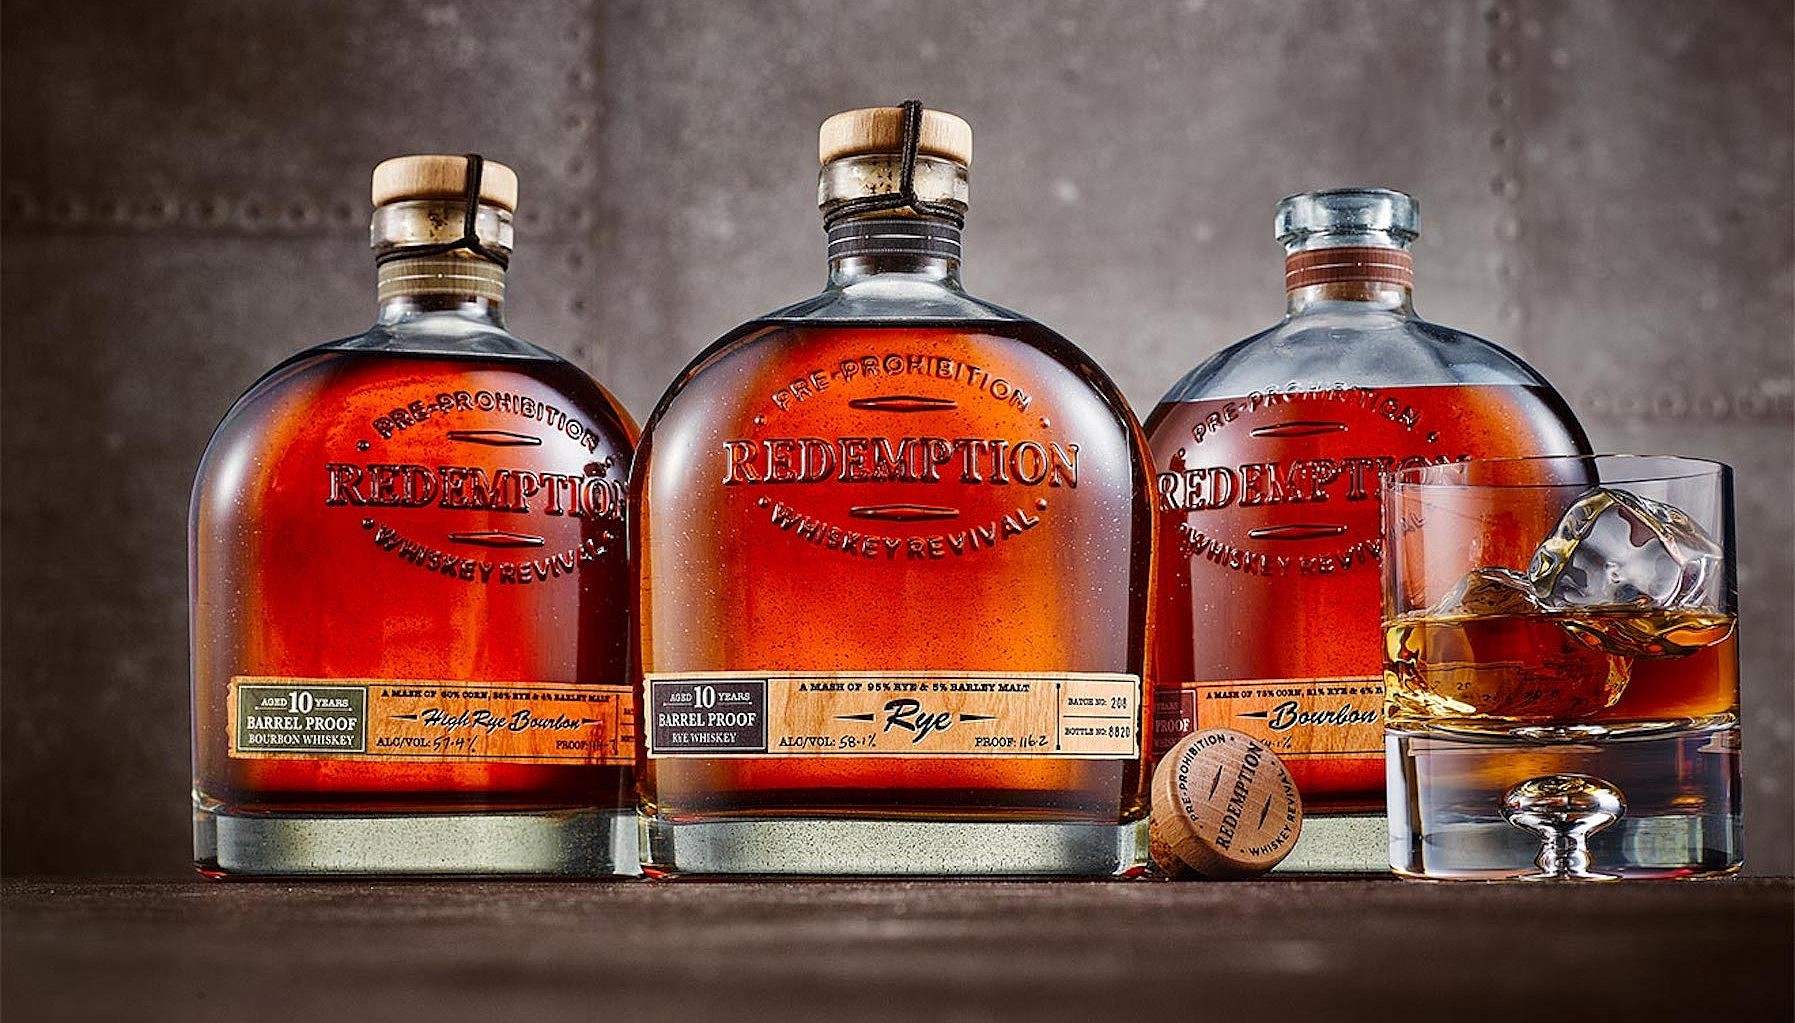 Cult Kentucky whiskey brand Redemption releases a delicious new trio